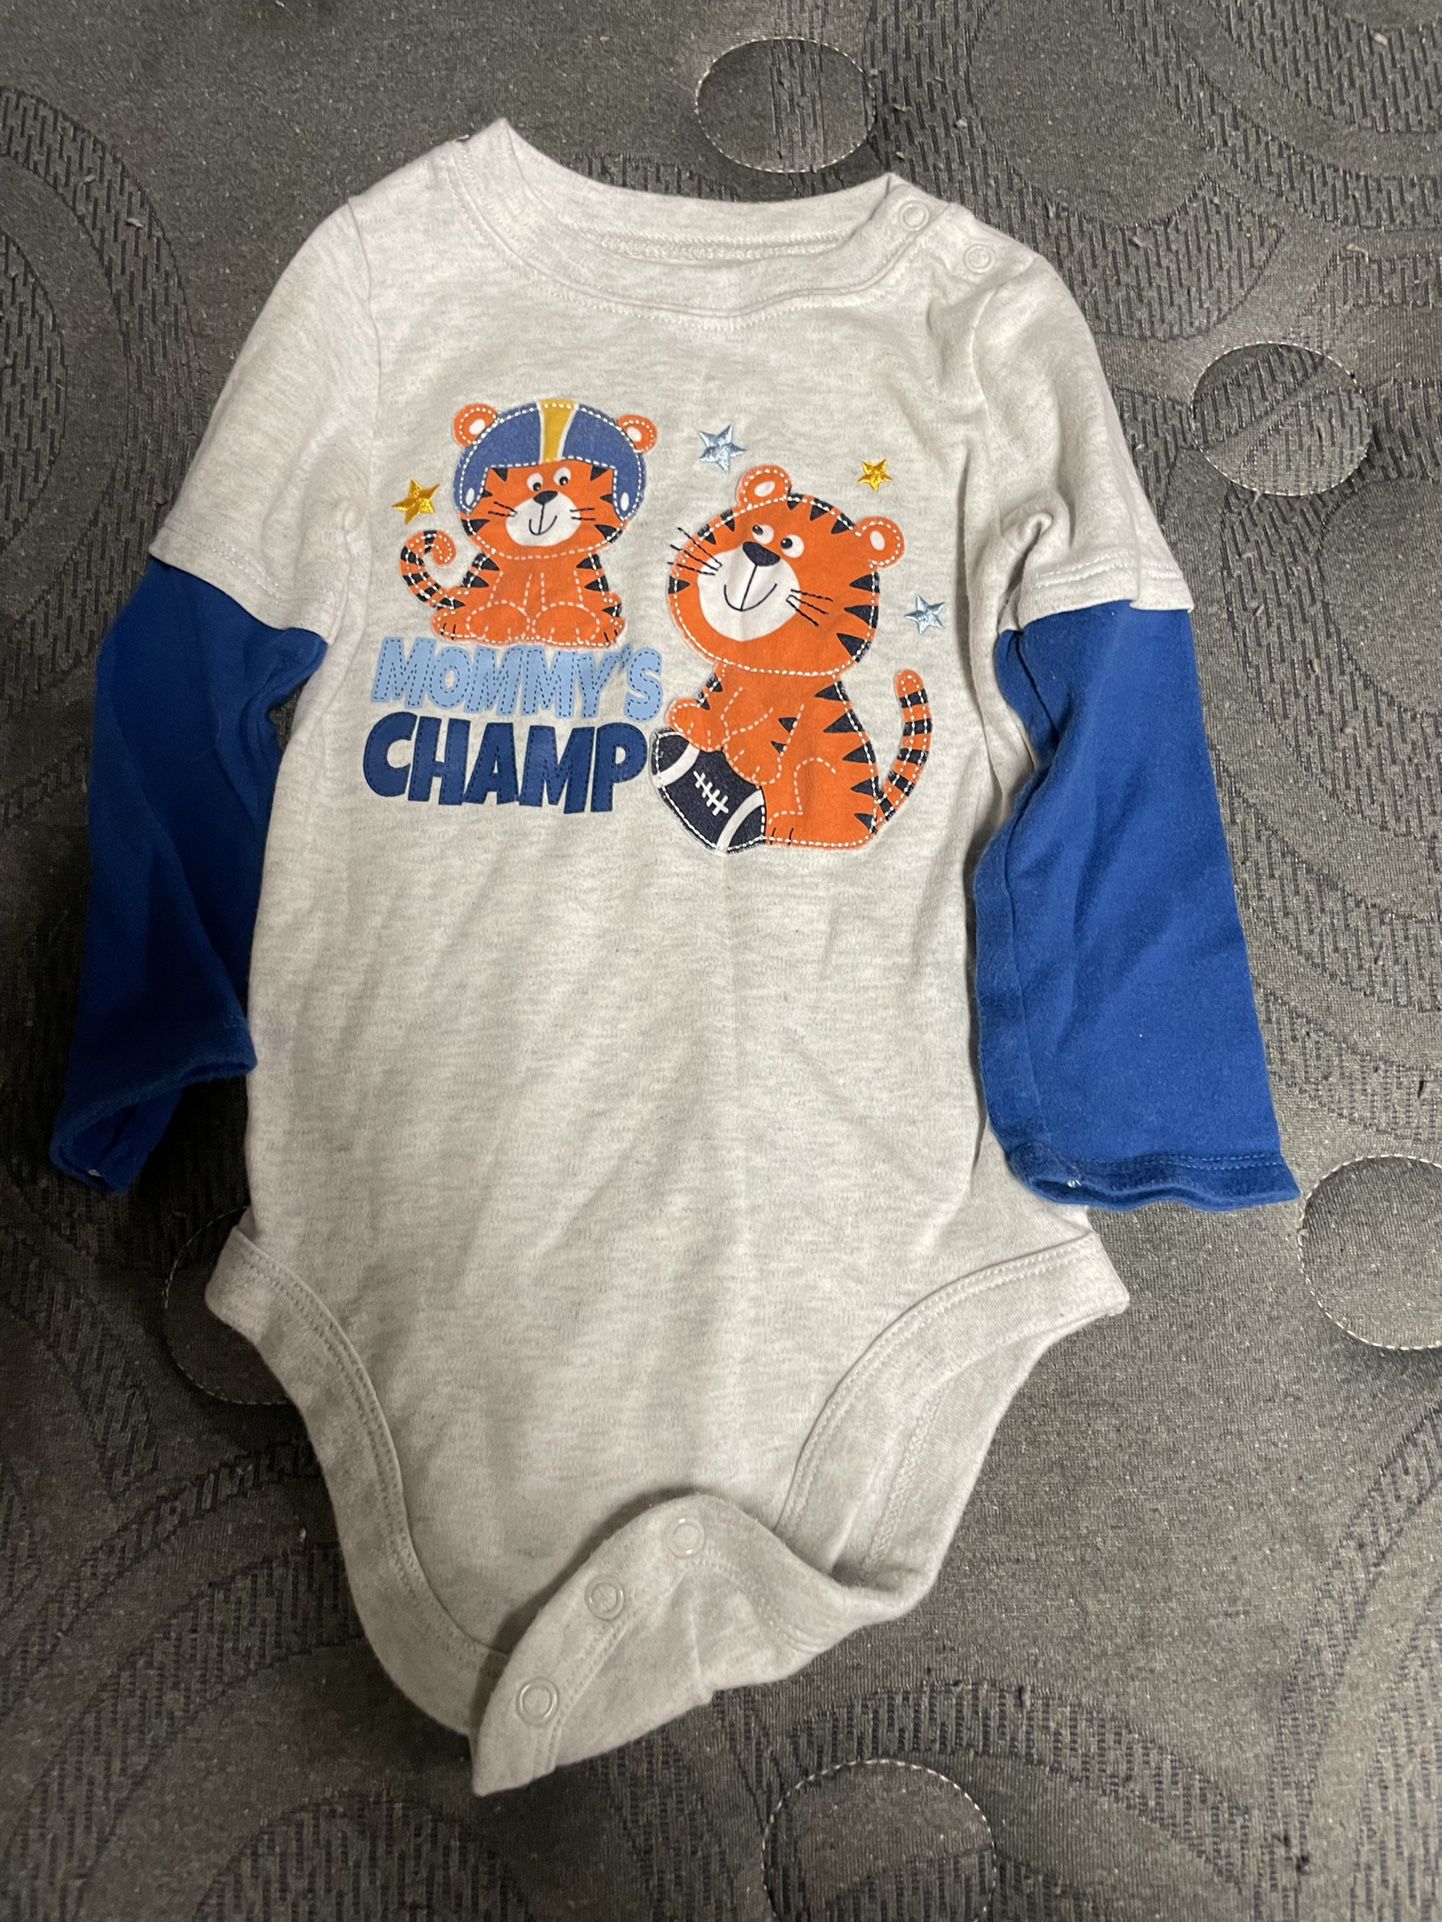  Long Sleeve Onesie Size 24 Months 